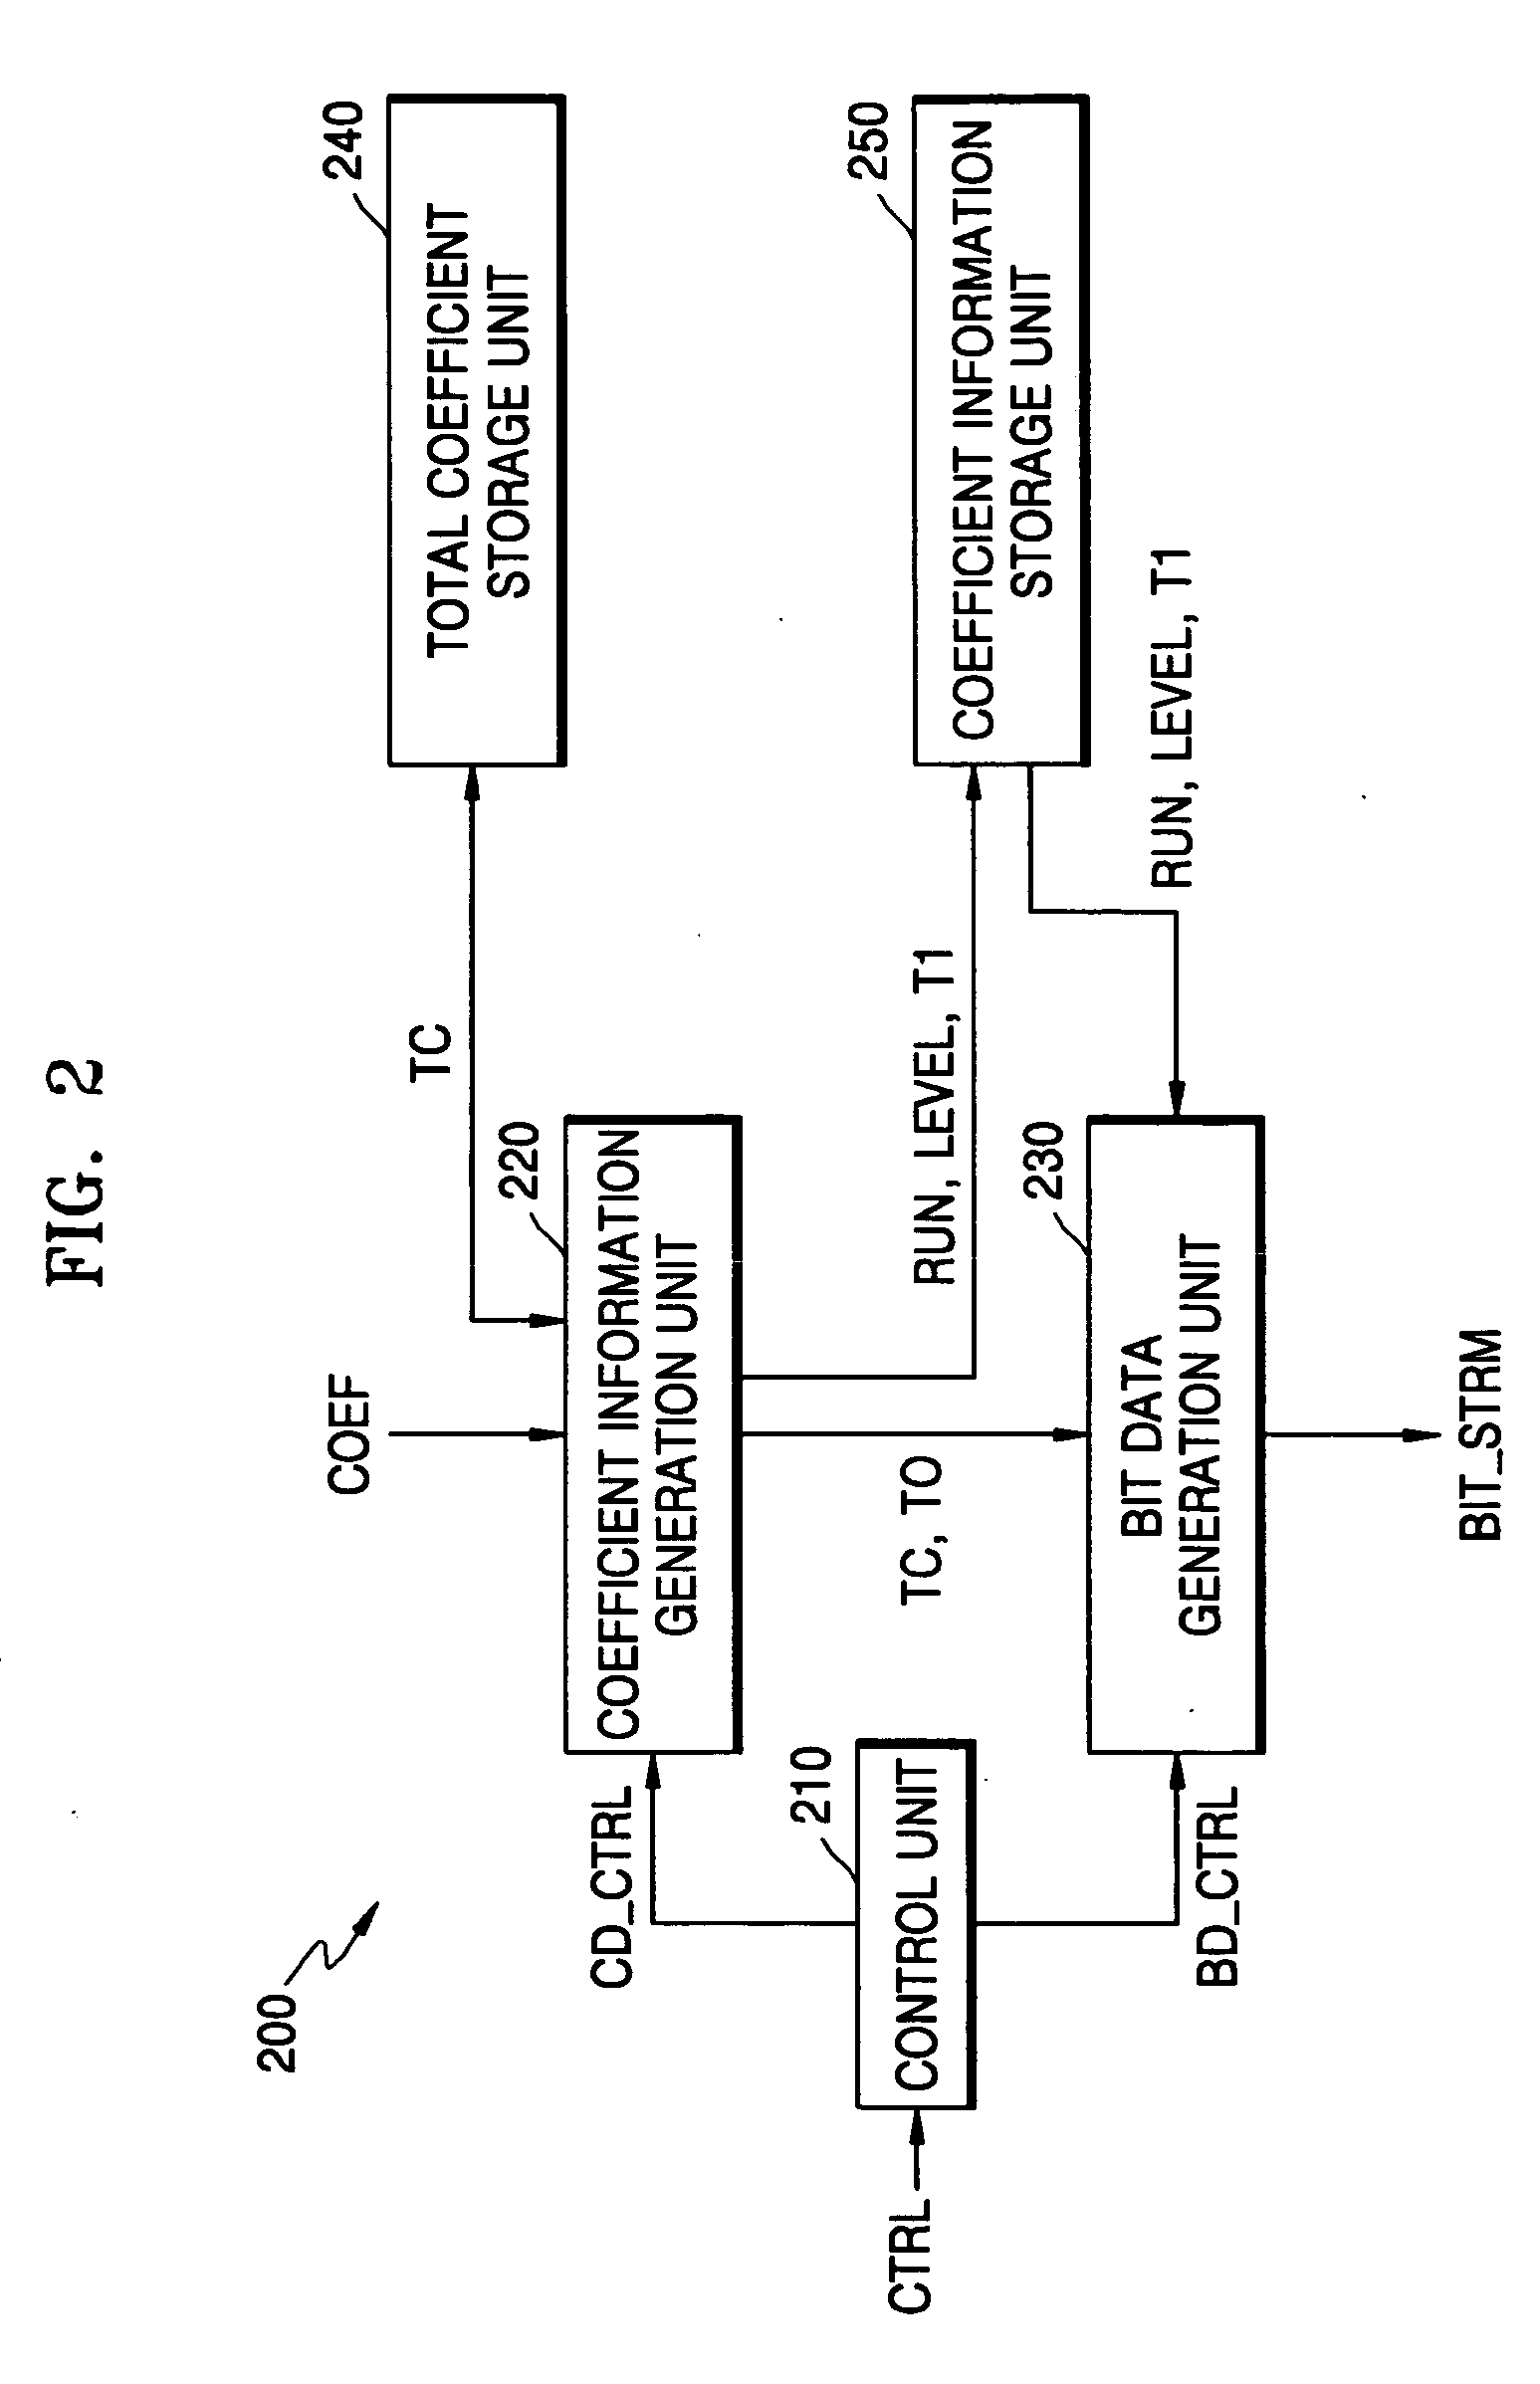 Context-adaptive variable length coding apparatus and methods